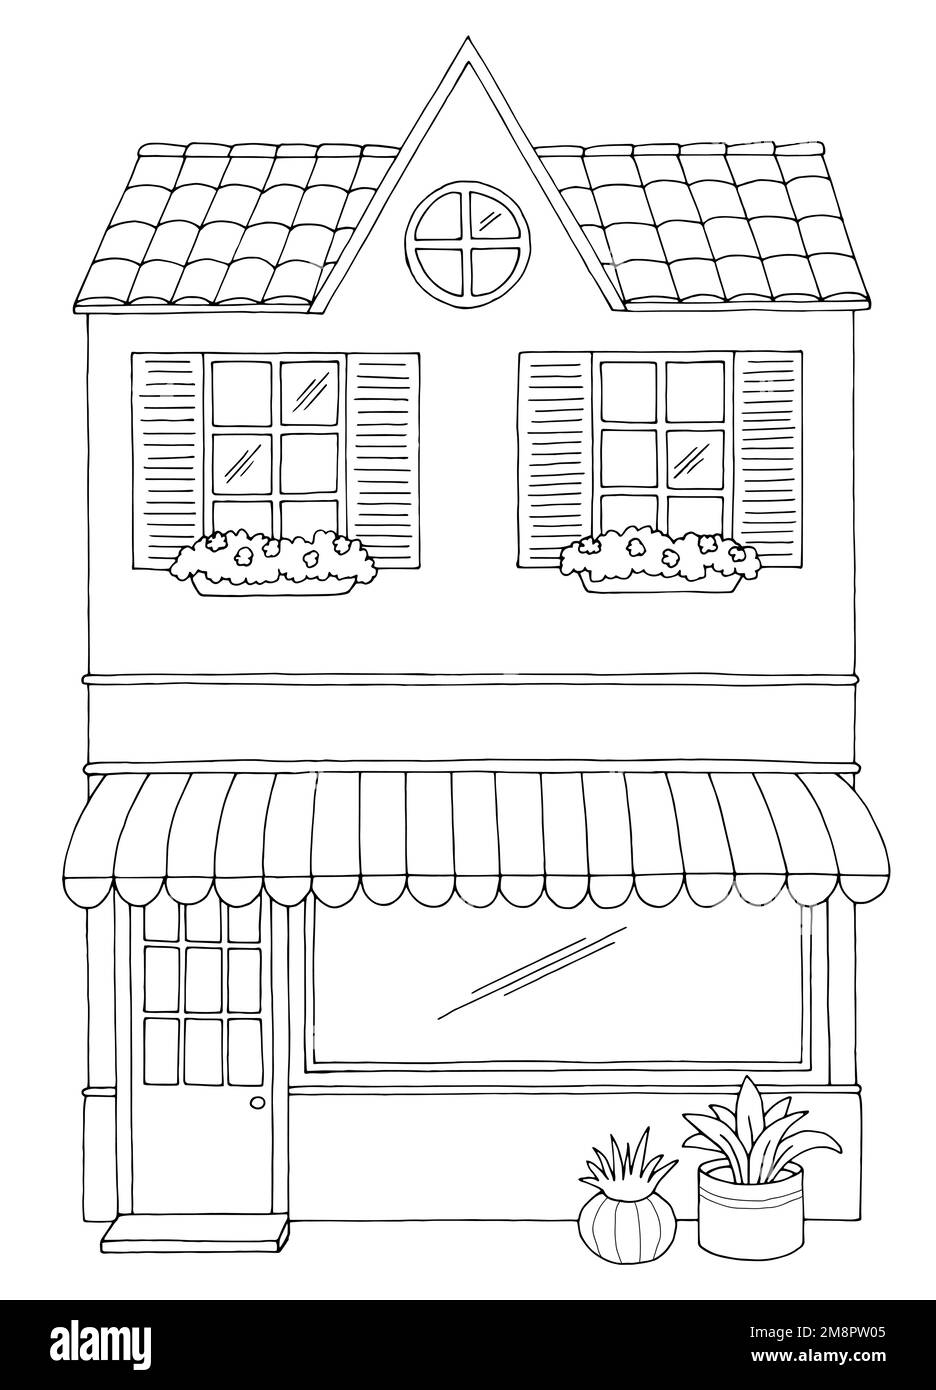 Shop exterior store graphic black white isolated sketch vertical illustration vector Stock Vector